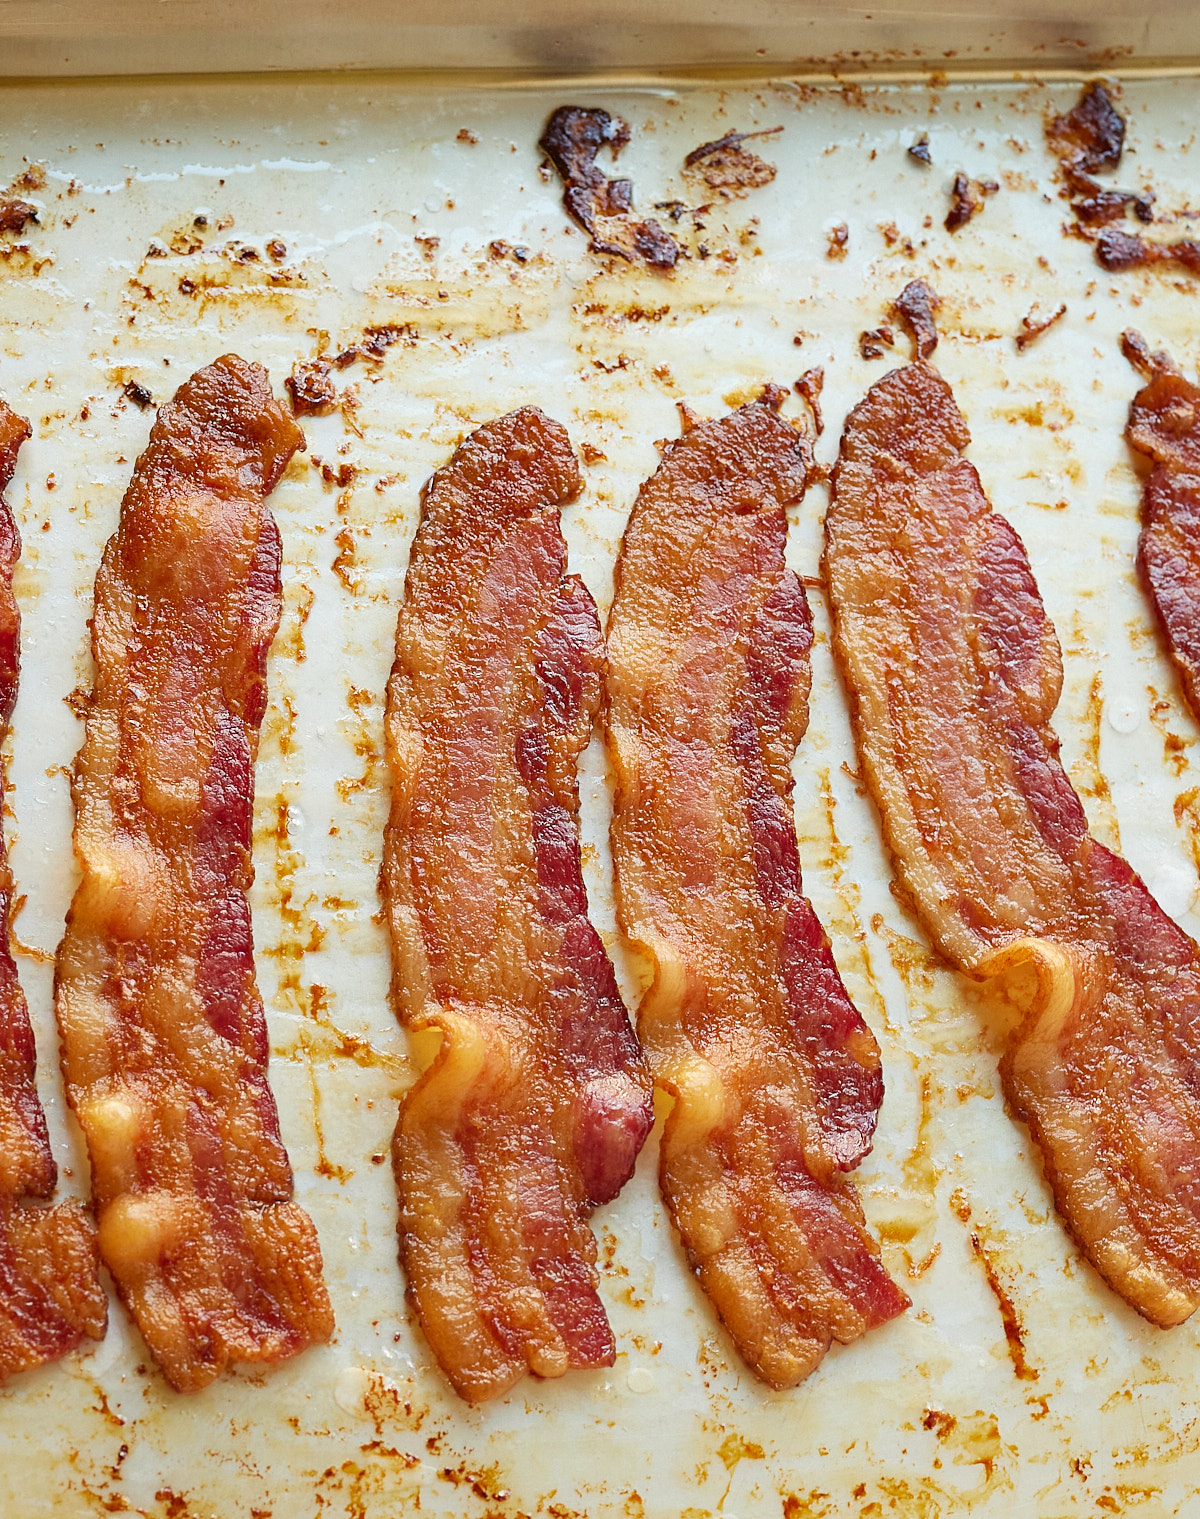 https://www.myforkinglife.com/wp-content/uploads/2022/01/how-to-bake-bacon-in-the-oven-1300.jpg